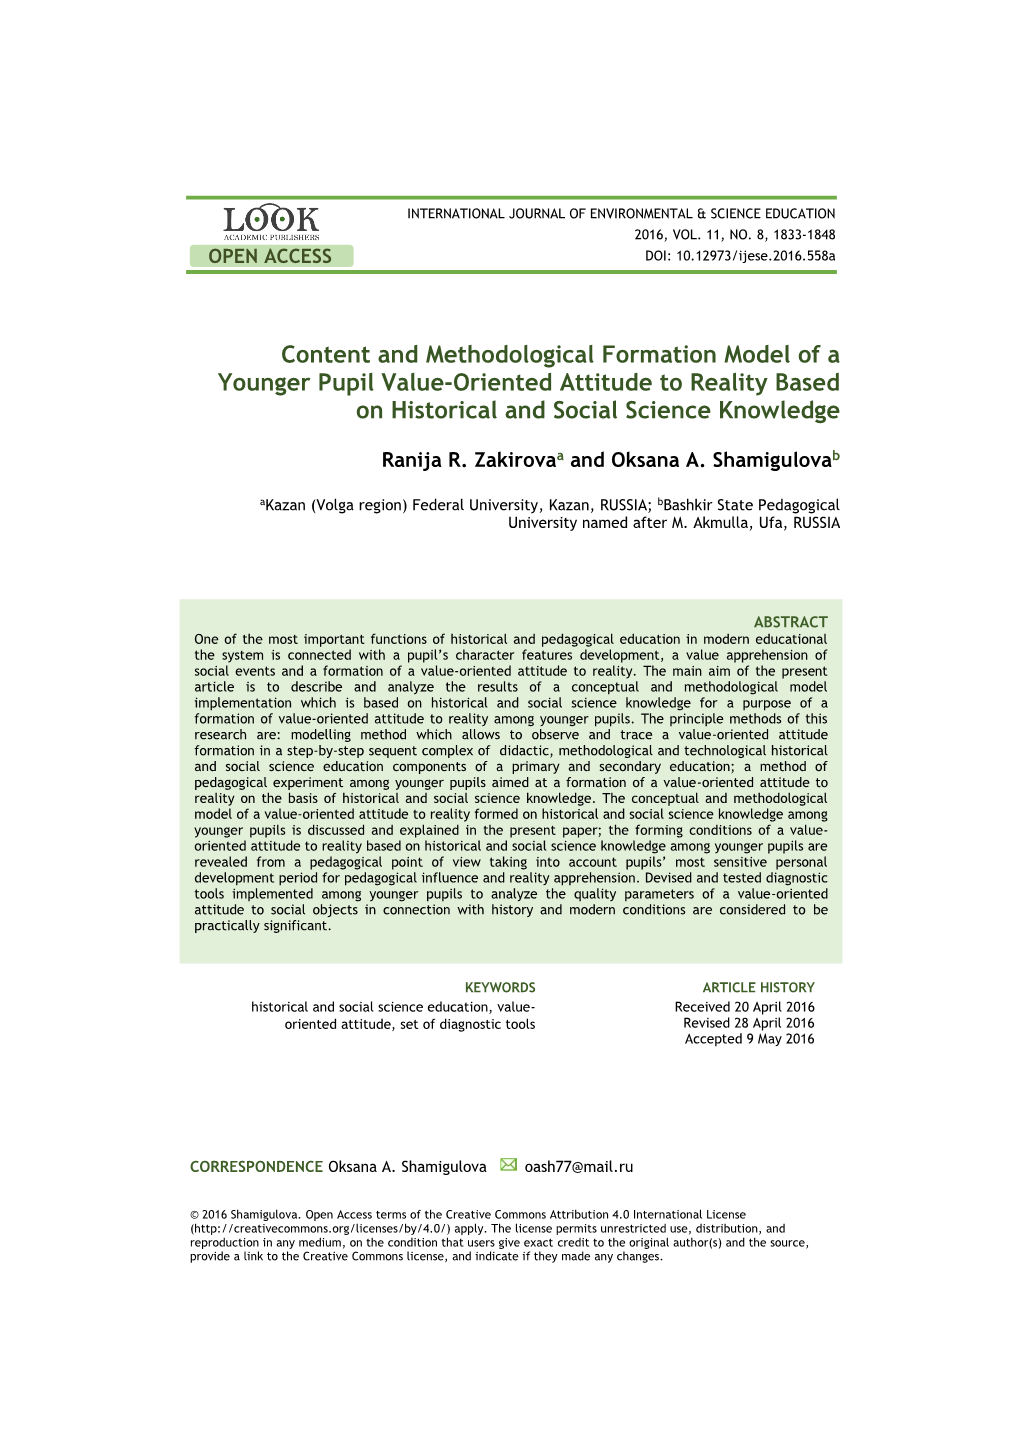 Content and Methodological Formation Model of a Younger Pupil Value-Oriented Attitude to Reality Based on Historical and Social Science Knowledge